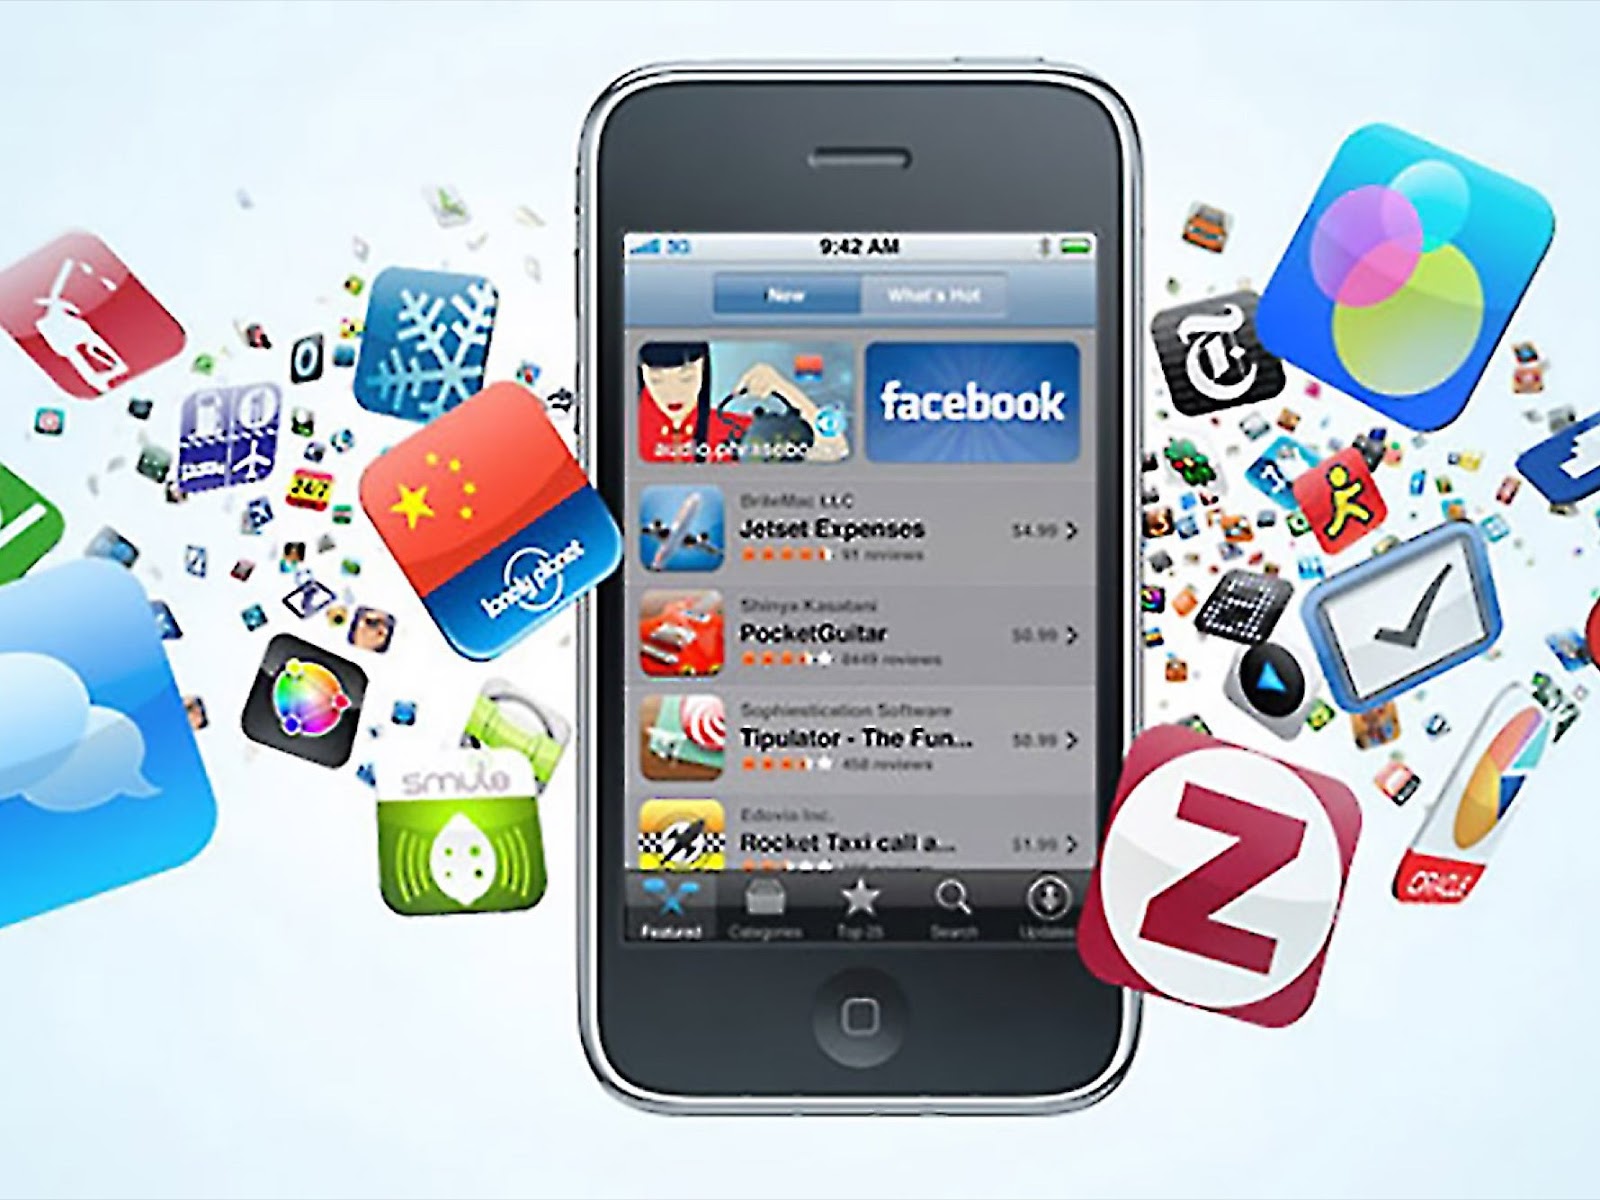 Mobile Apps Revolution Your Essential